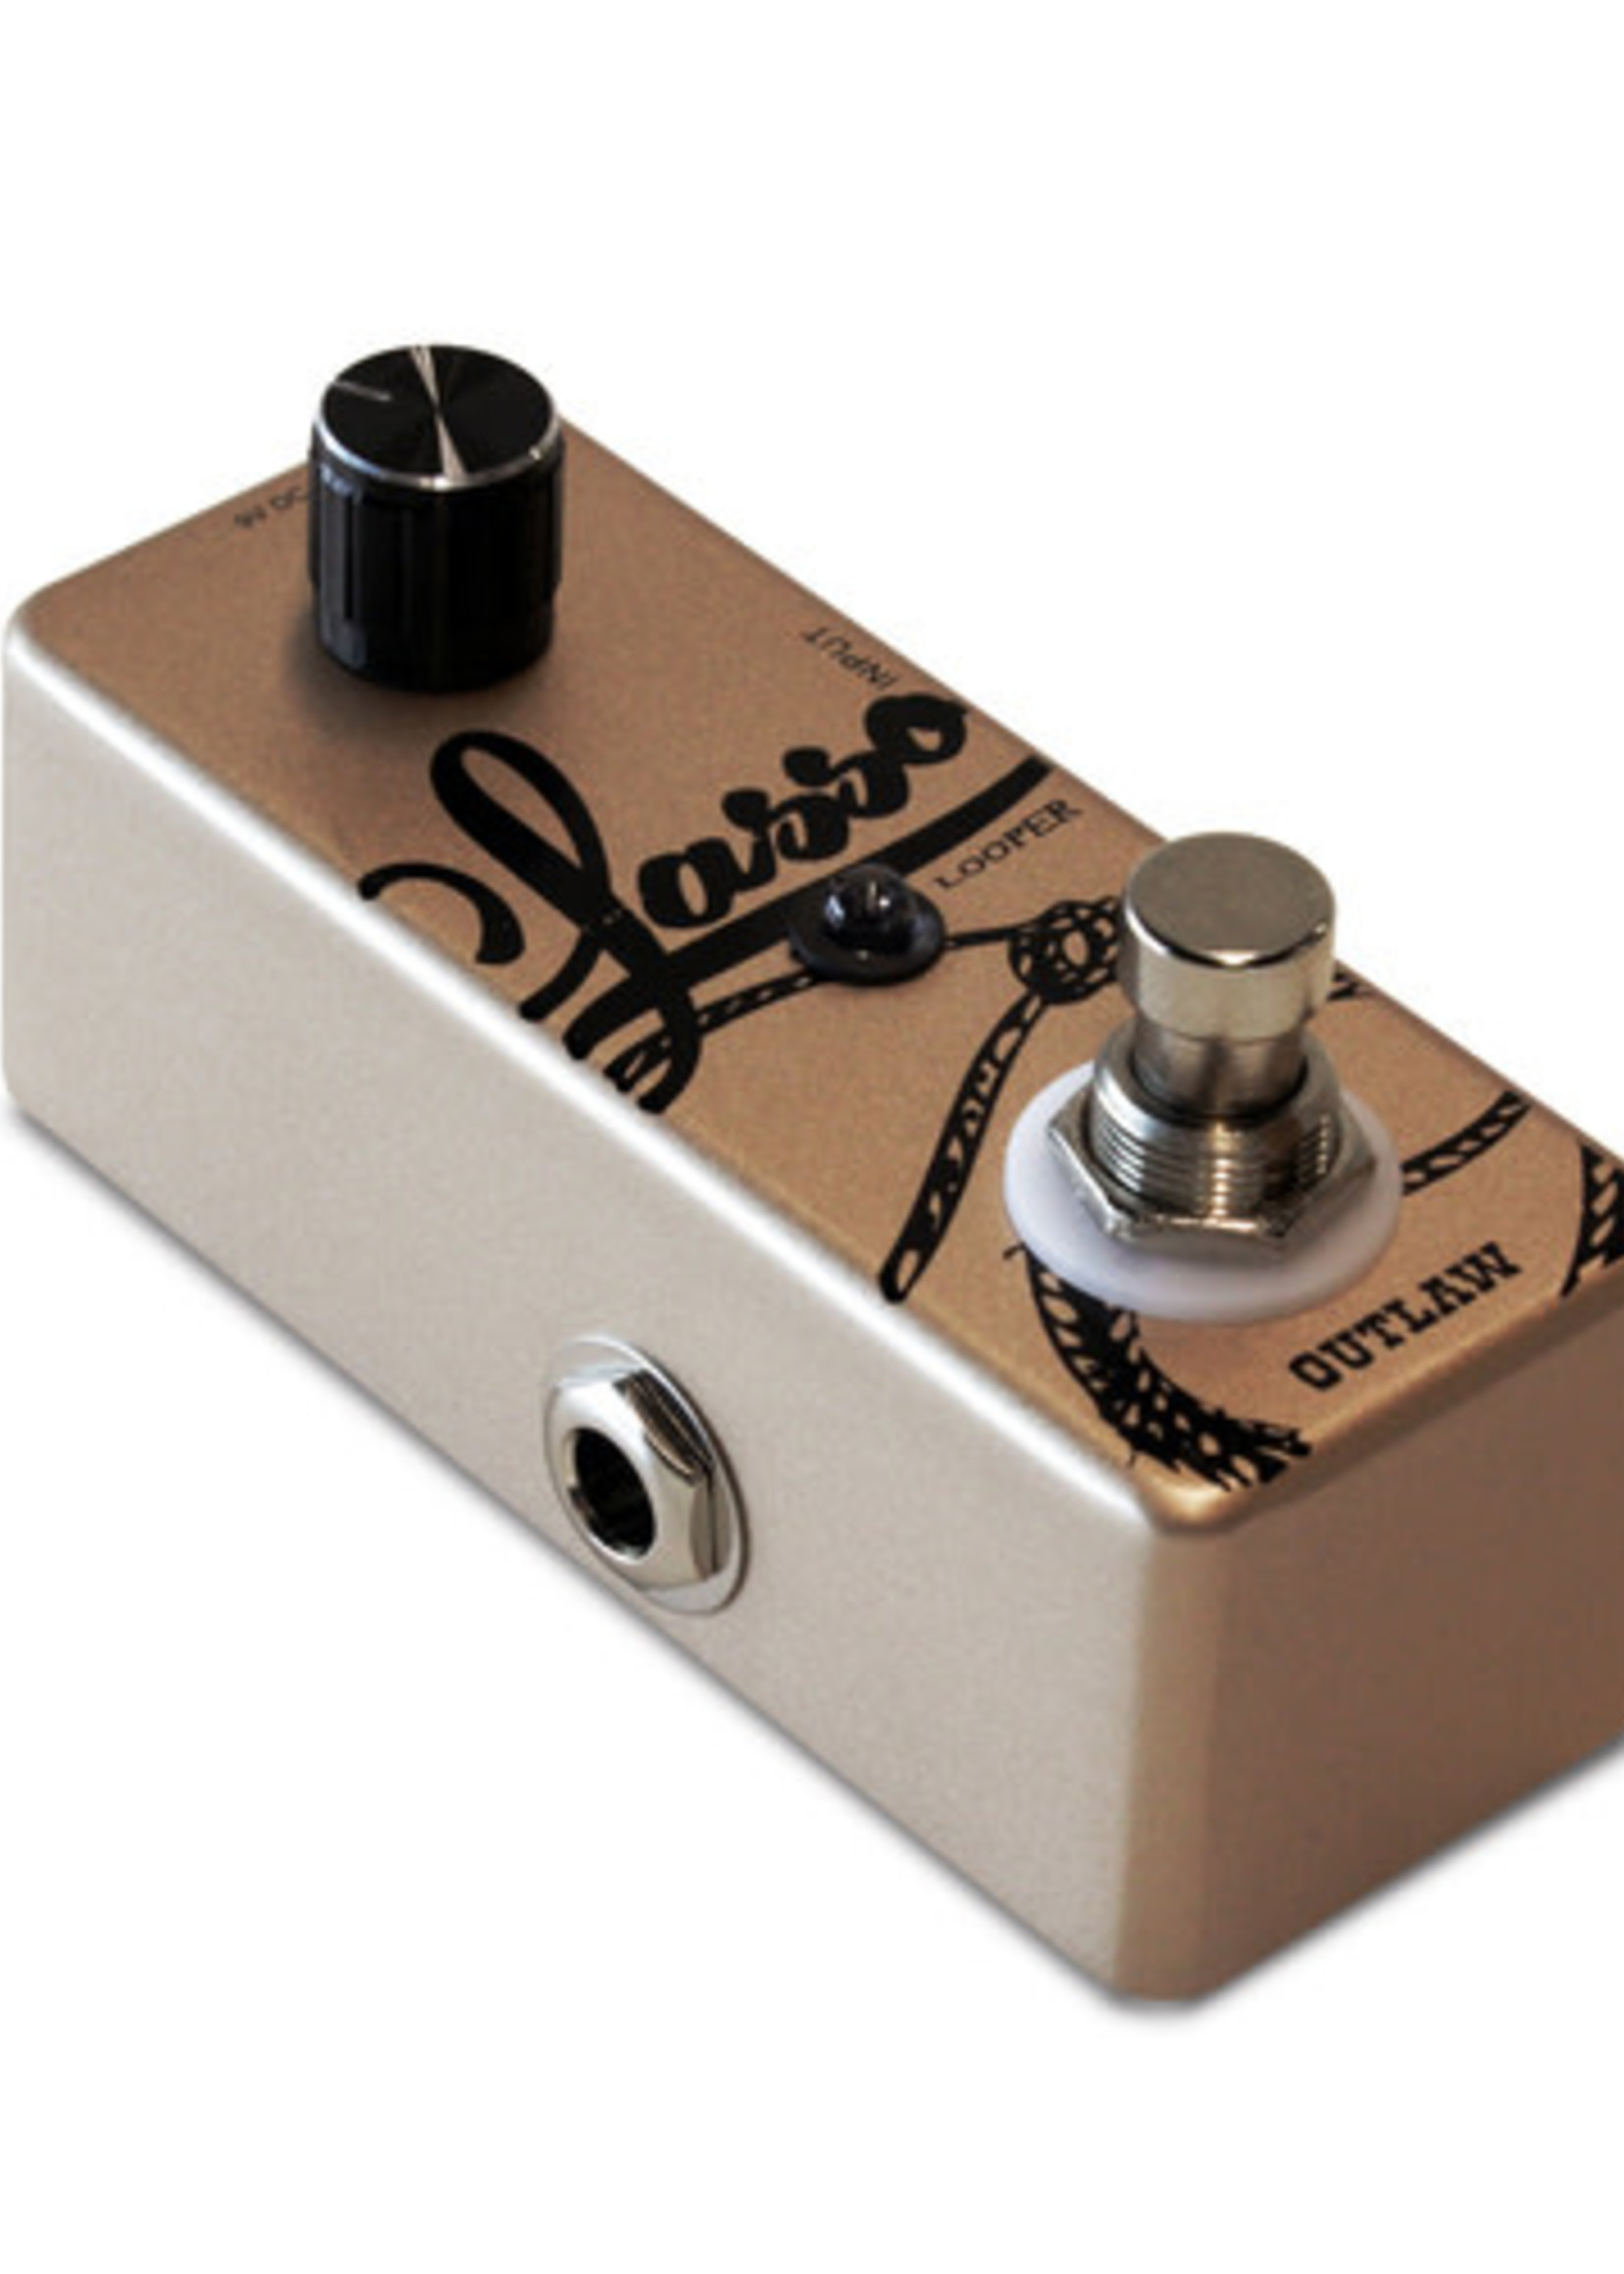 Outlaw Outlaw FX - Lasso Looper